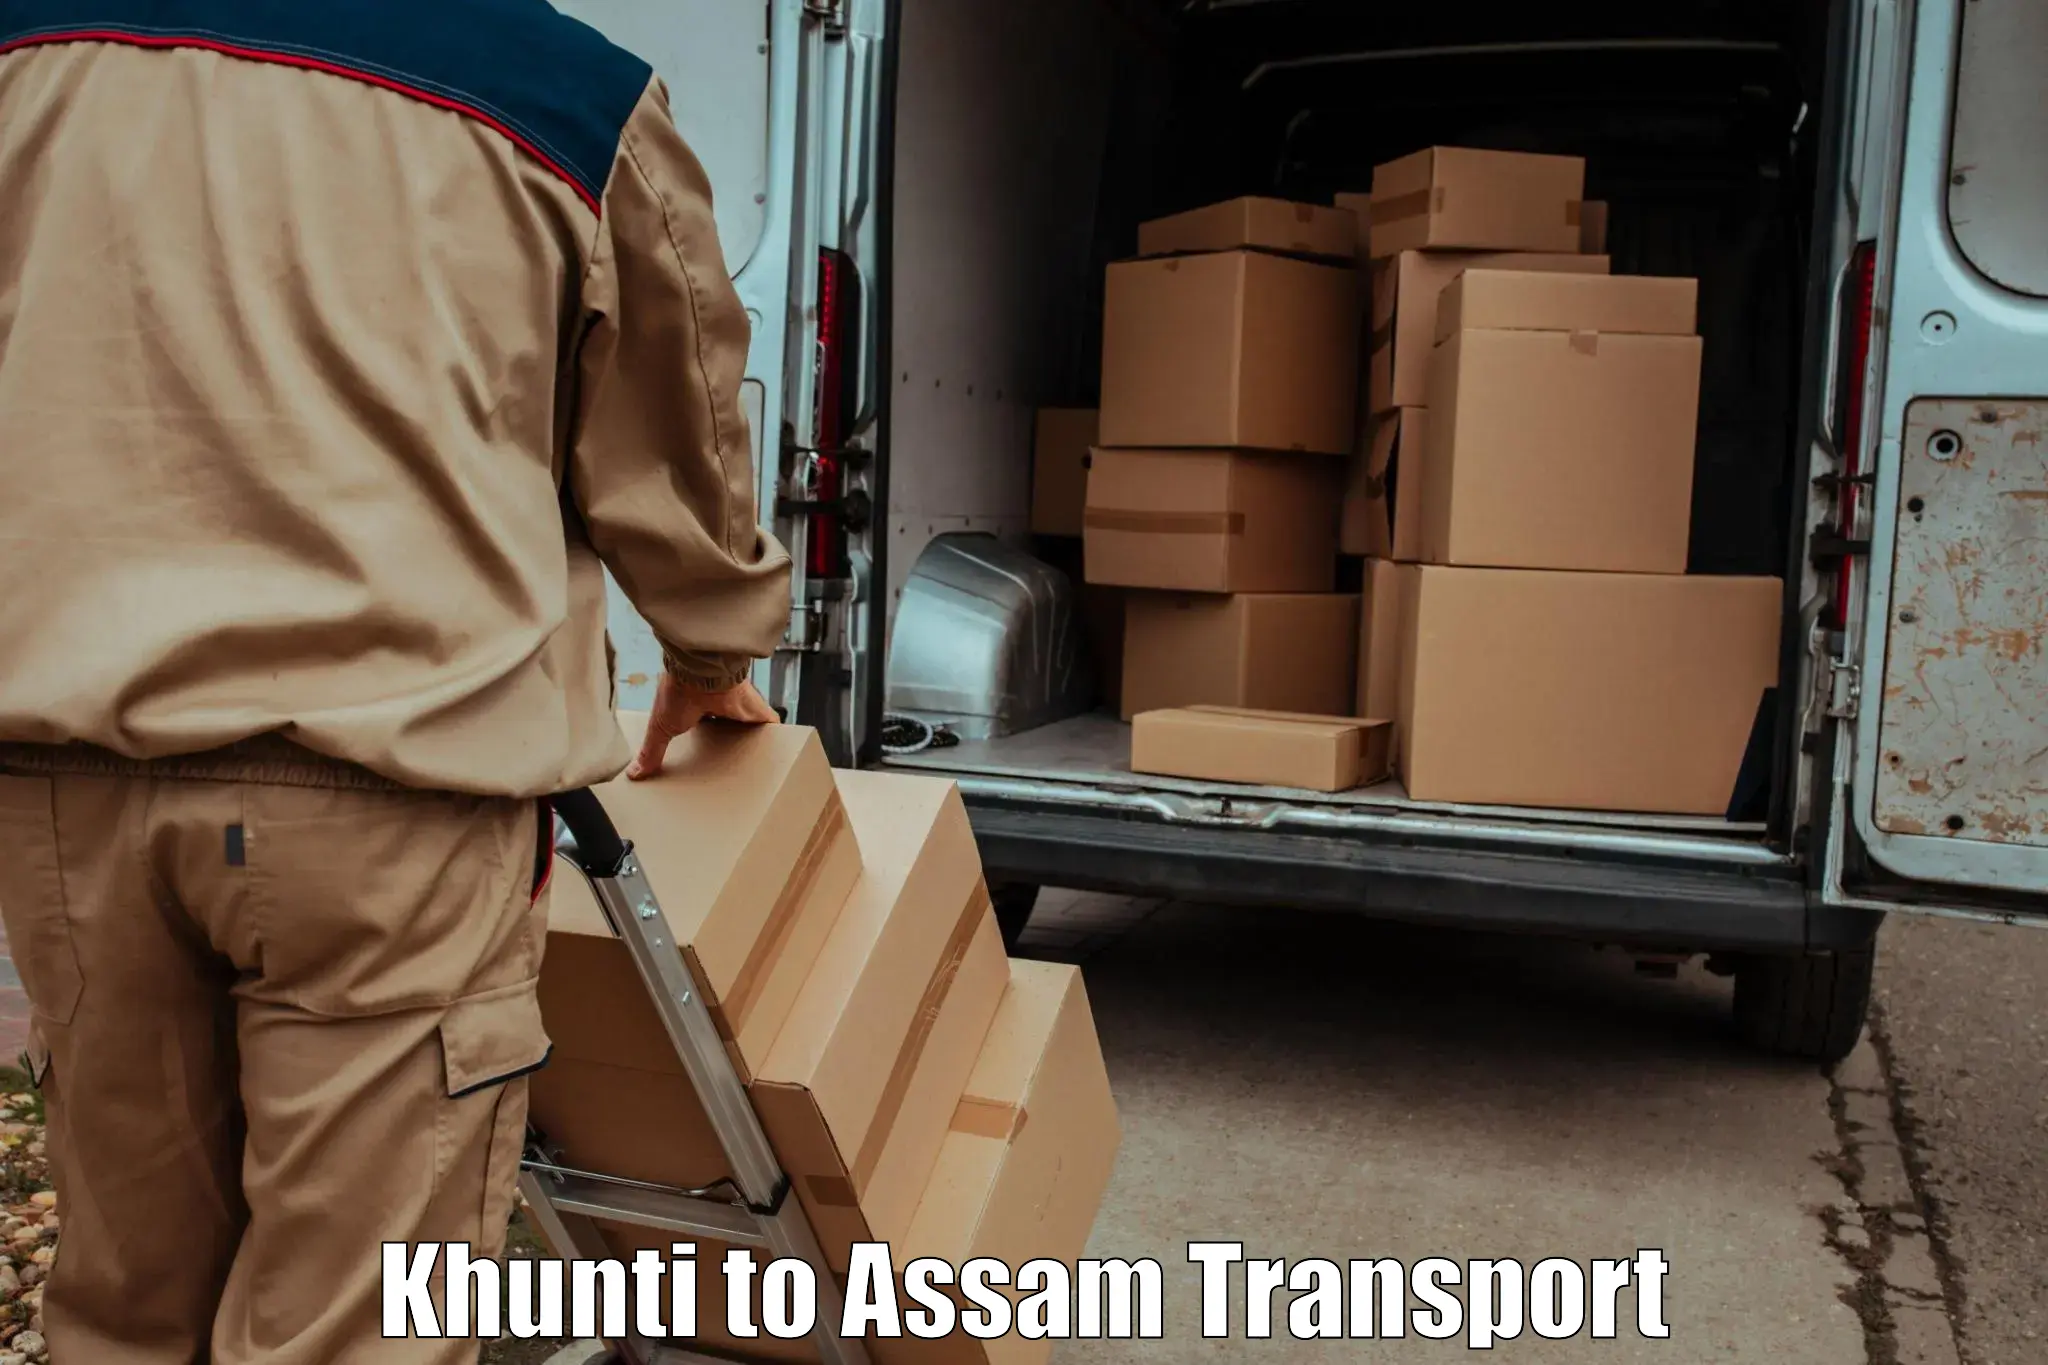 Daily parcel service transport Khunti to Bhaga